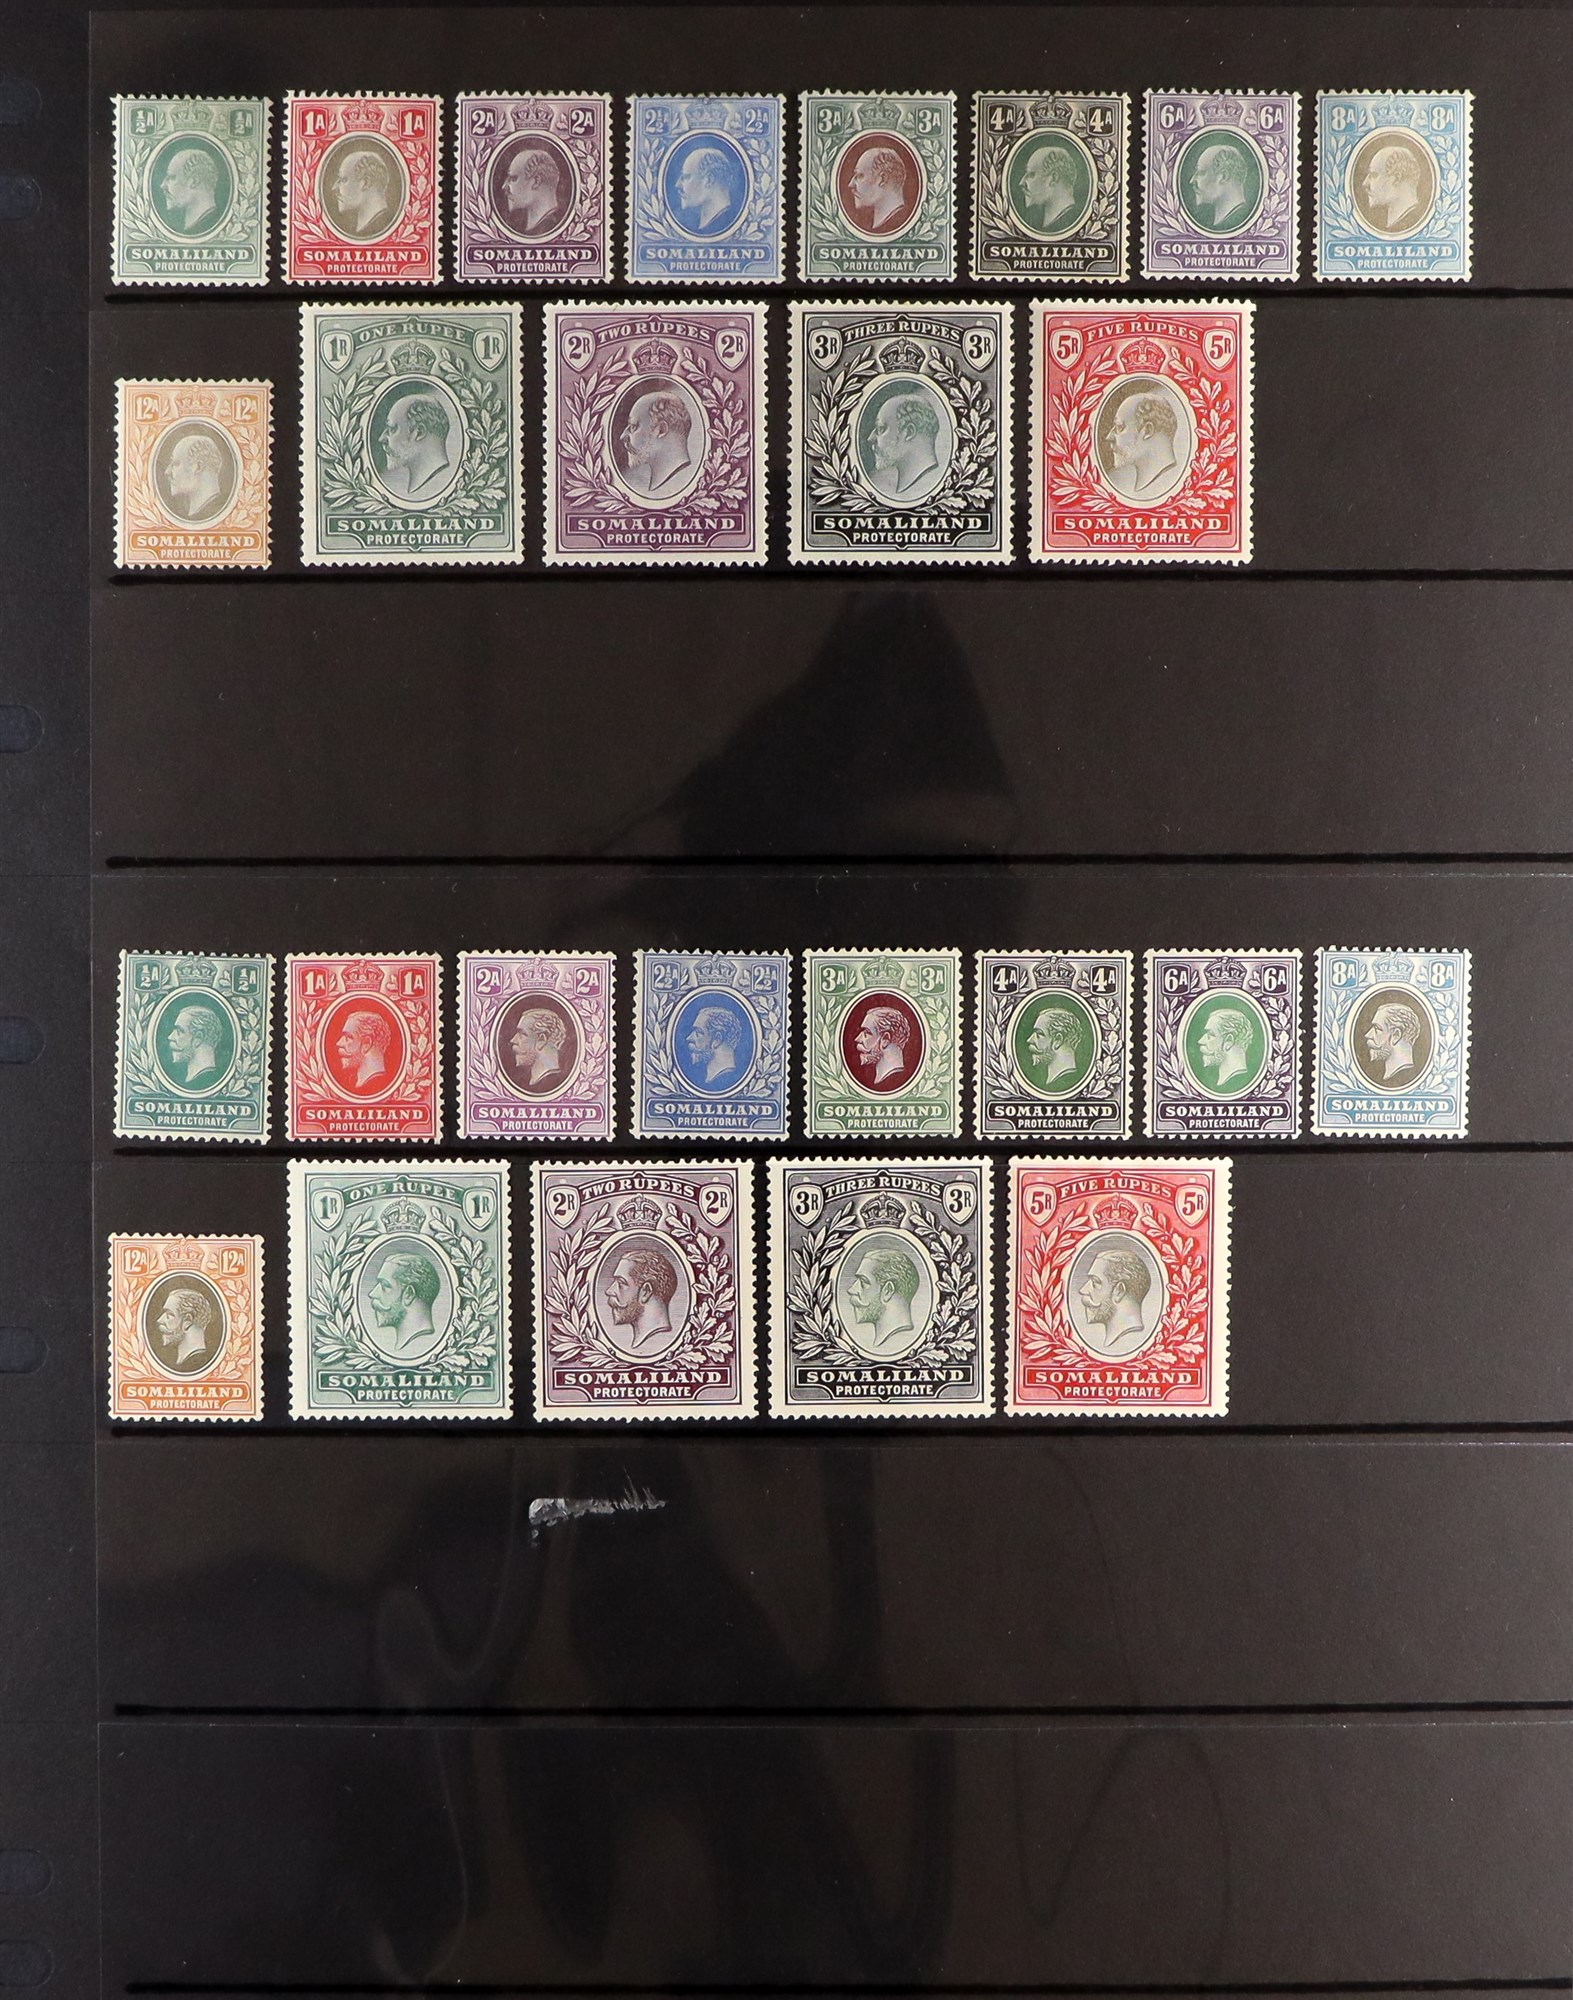 SOMALILAND PROTECT 1904 set (SG 32/44) and 1921 set (SG 73/85) mint. Cat. £500 (26 stamps)